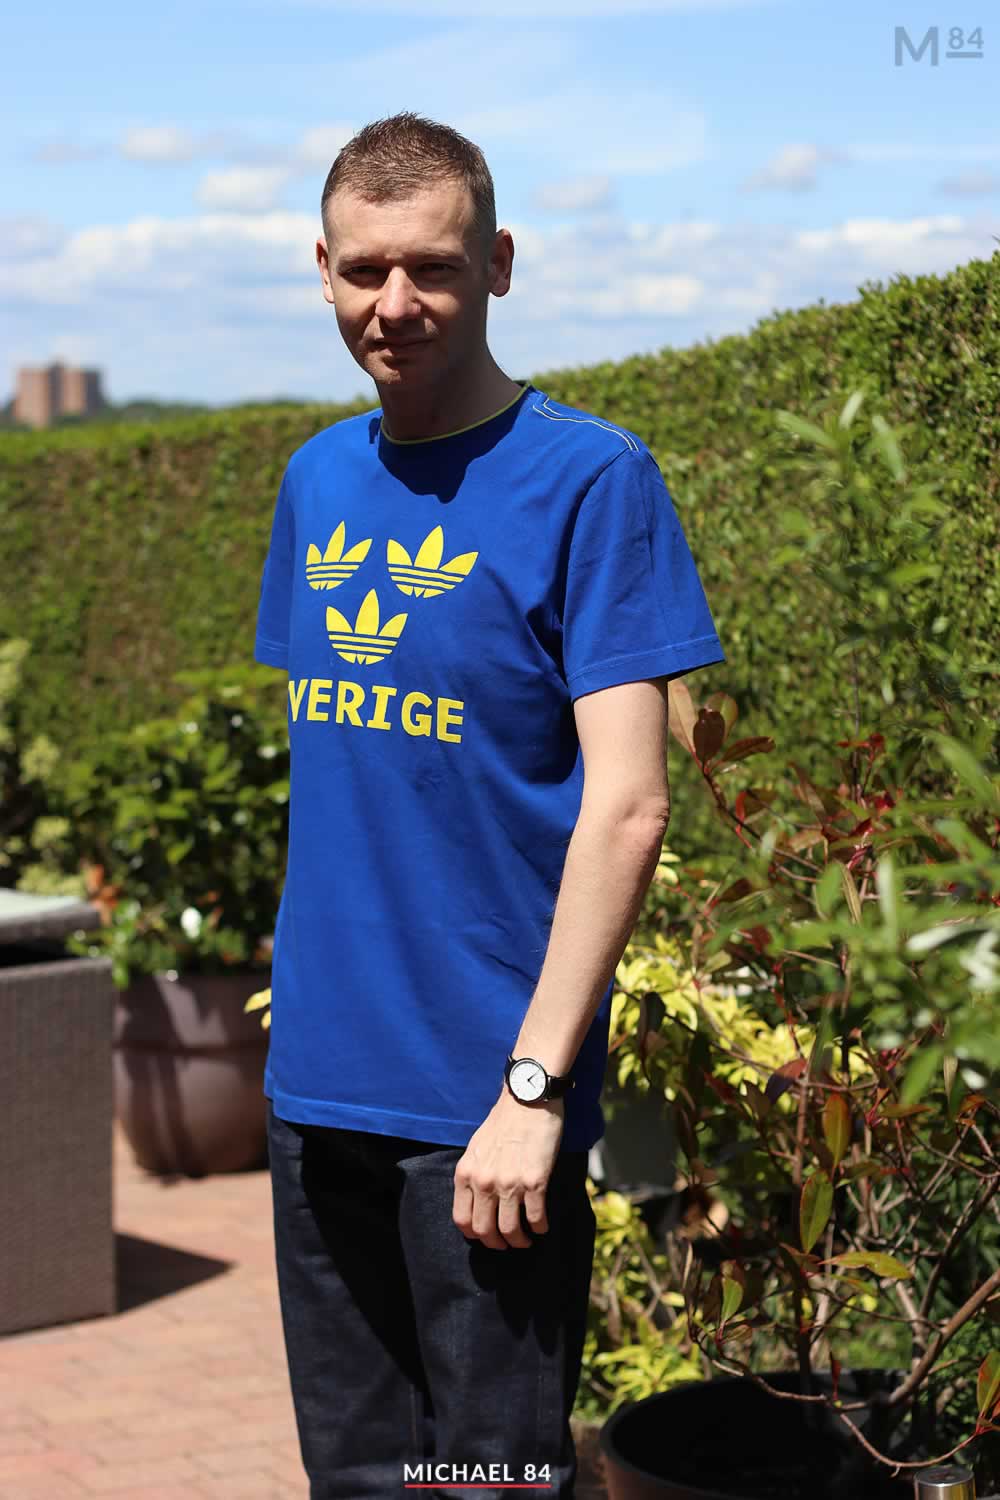 The Adidas Sverige T-Shirt For A Casual Summer Outfit | Michael 84